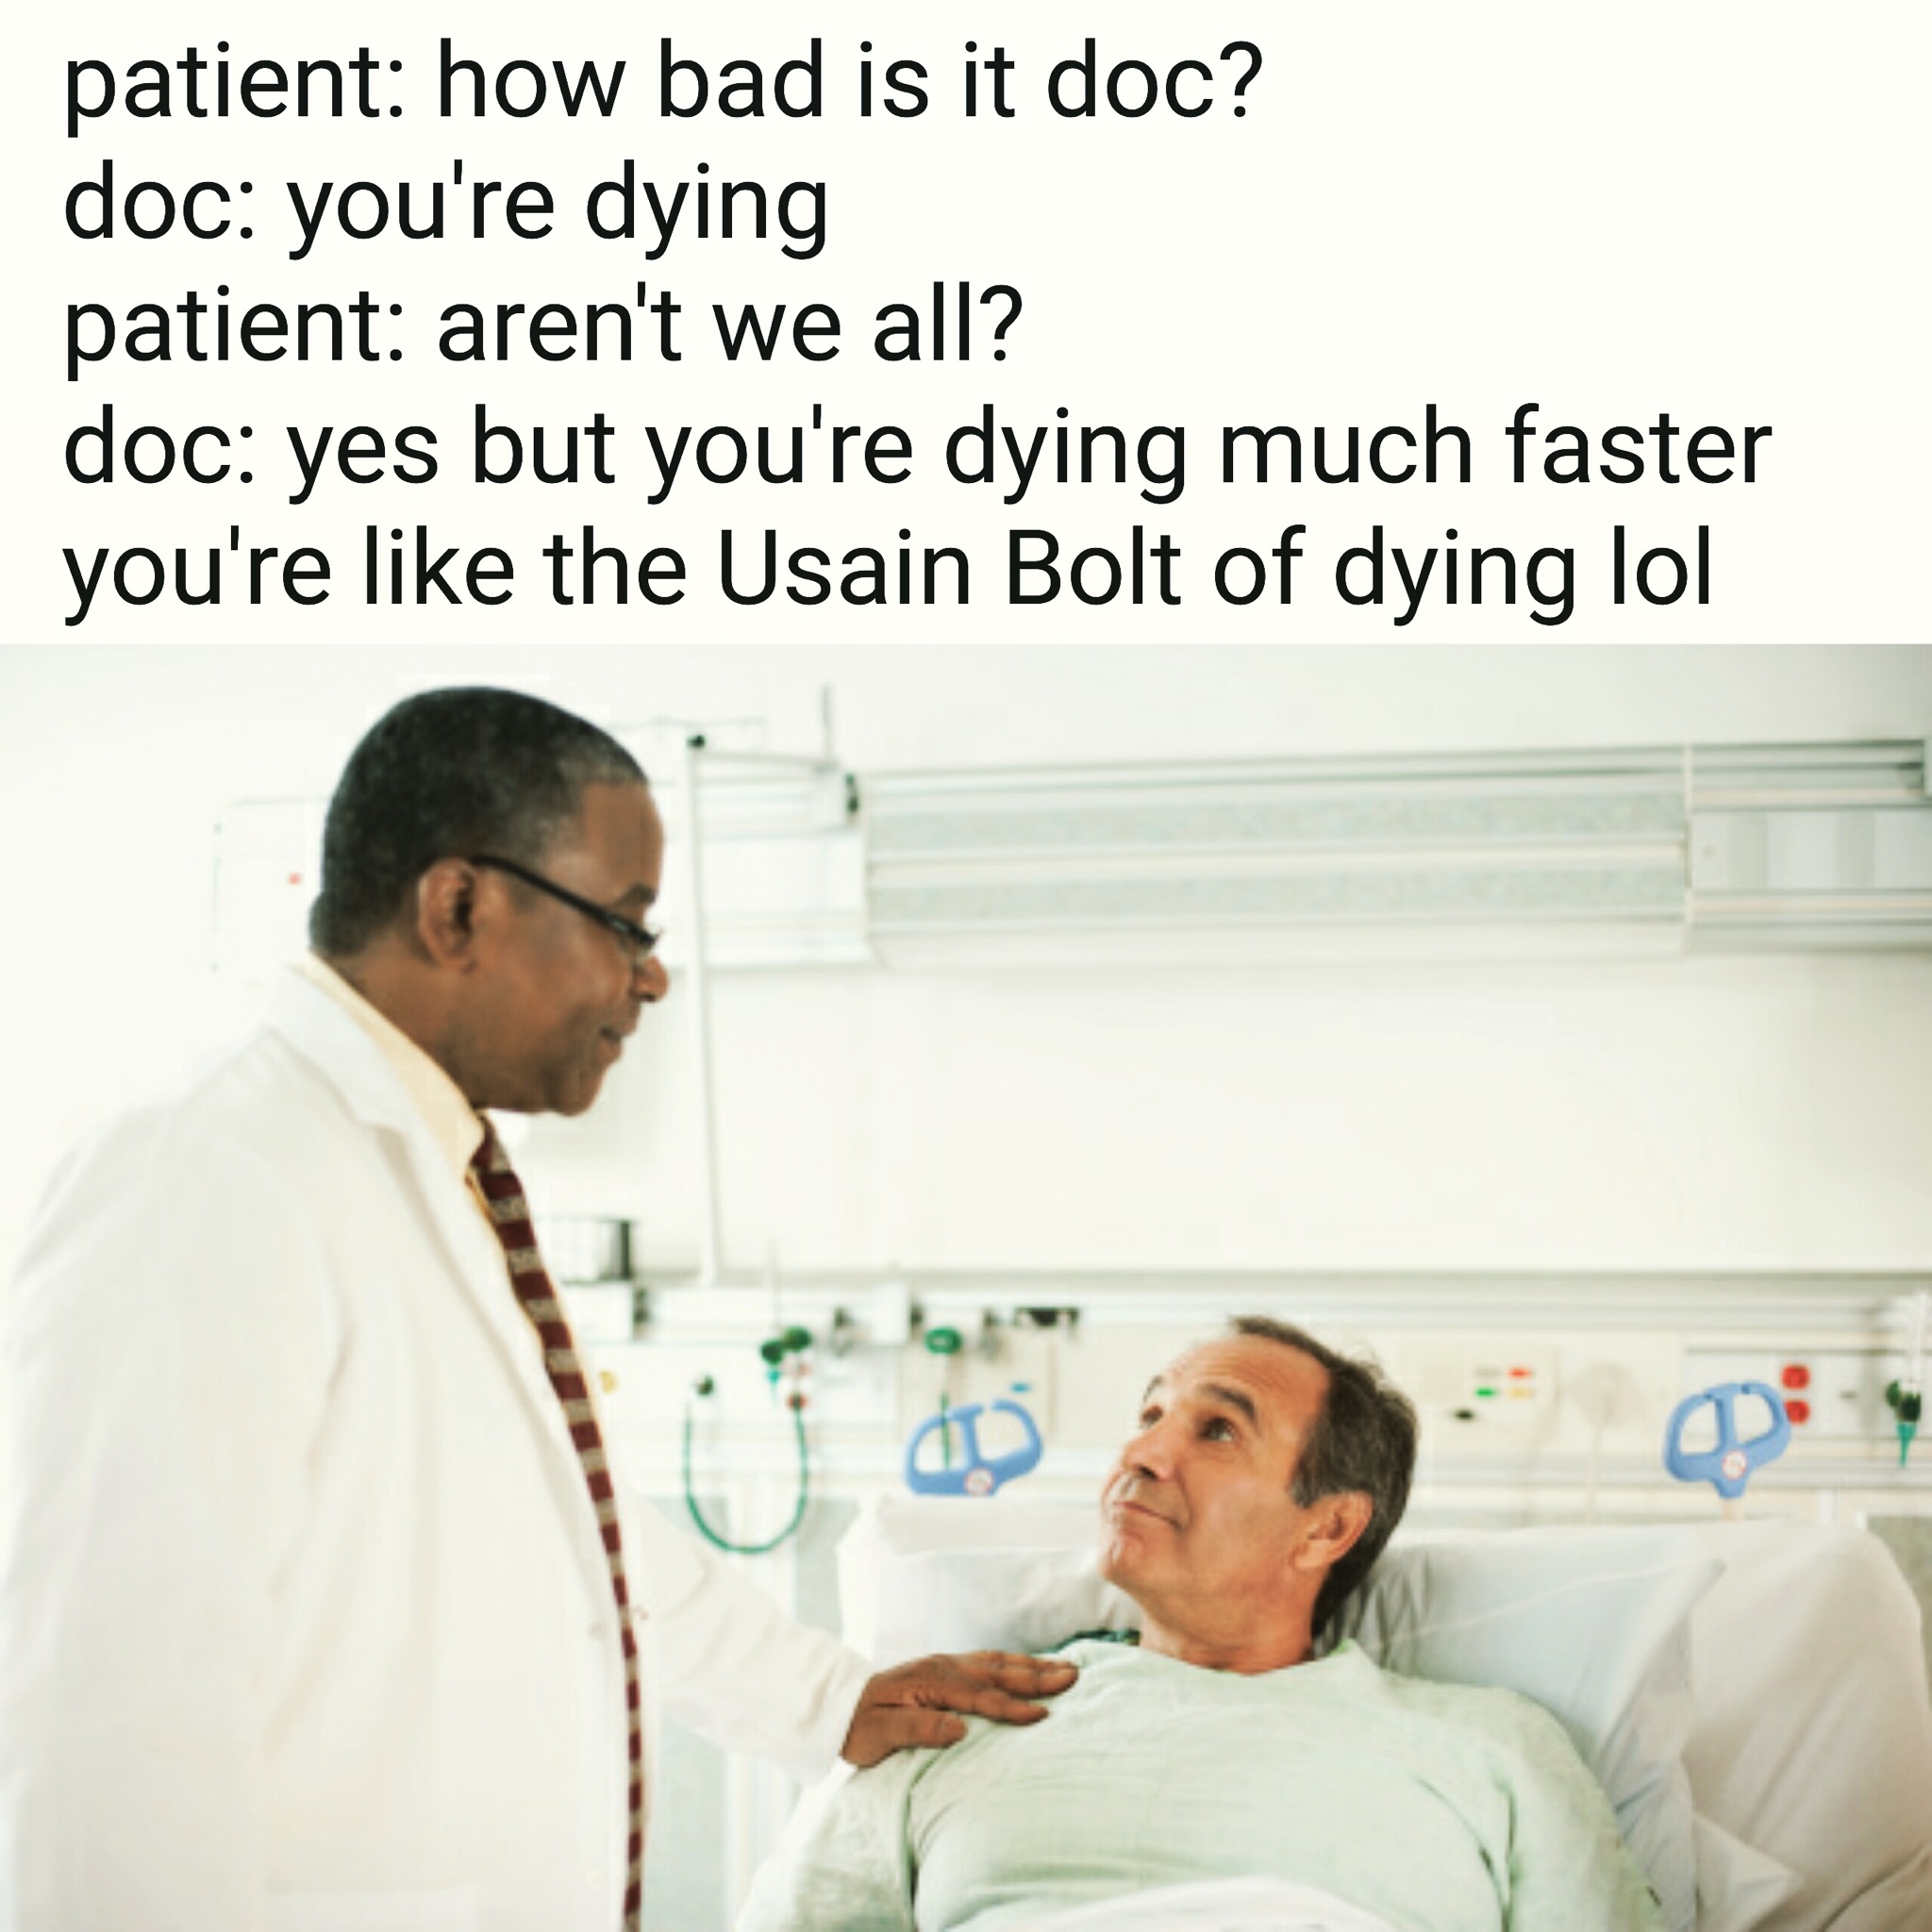 usain bolt of dying meme - patient how bad is it doc? doc you're dying patient aren't we all? doc yes but you're dying much faster you're the Usain Bolt of dying lol